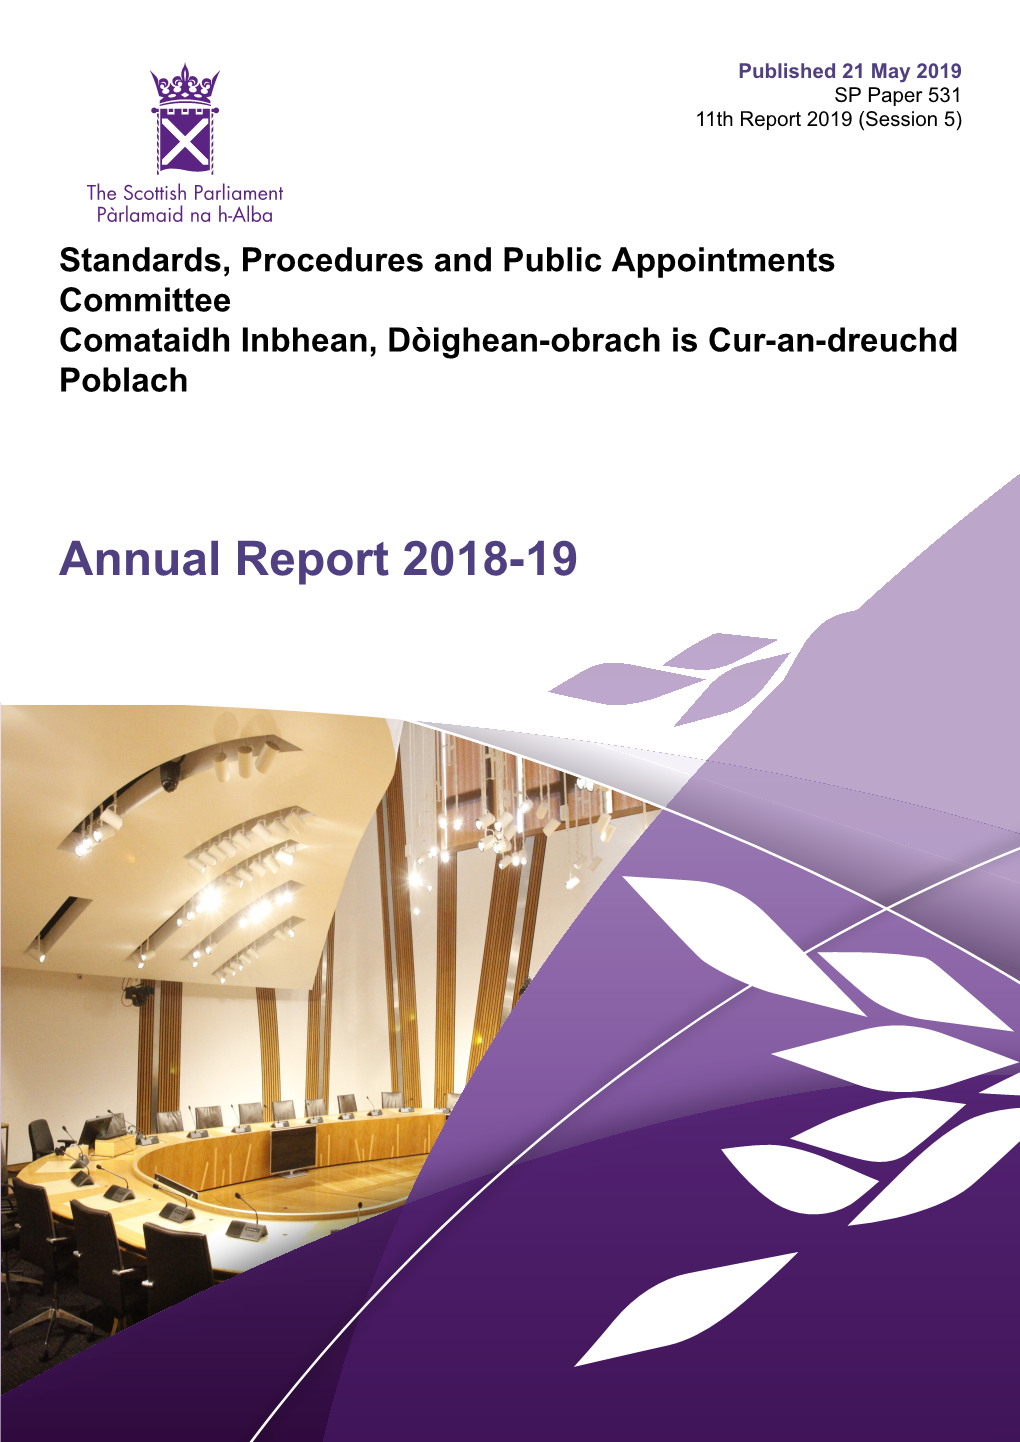 Annual Report 2018-19 Published in Scotland by the Scottish Parliamentary Corporate Body